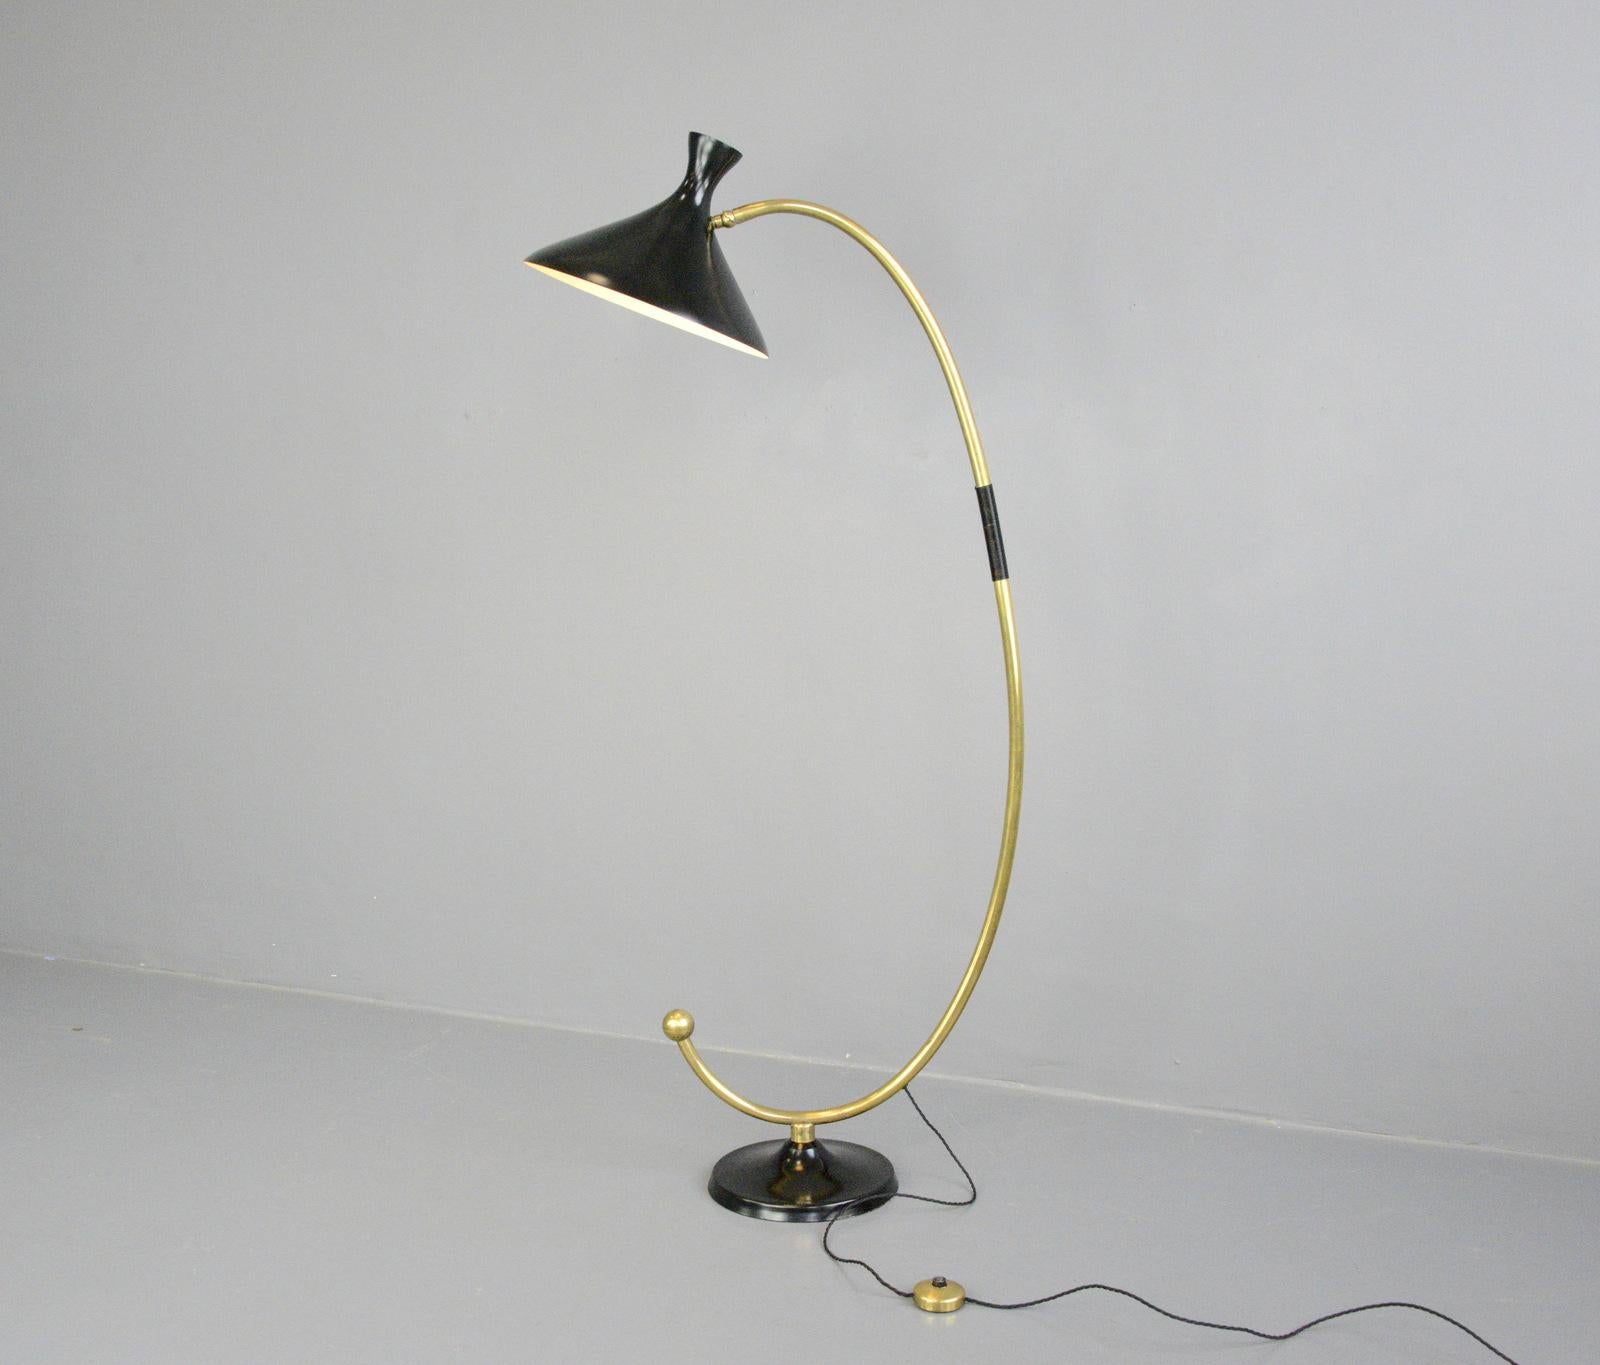 Midcentury floor lamp, circa 1950s

- Arched brass arm
- Original foot switch
- Adjustable steel shade
- Takes E27 fitting bulbs
- Austrian, 1950s
- Measures: 160cm tall x 70cm deep x 38cm wide

Condition report:

Fully re-wired with